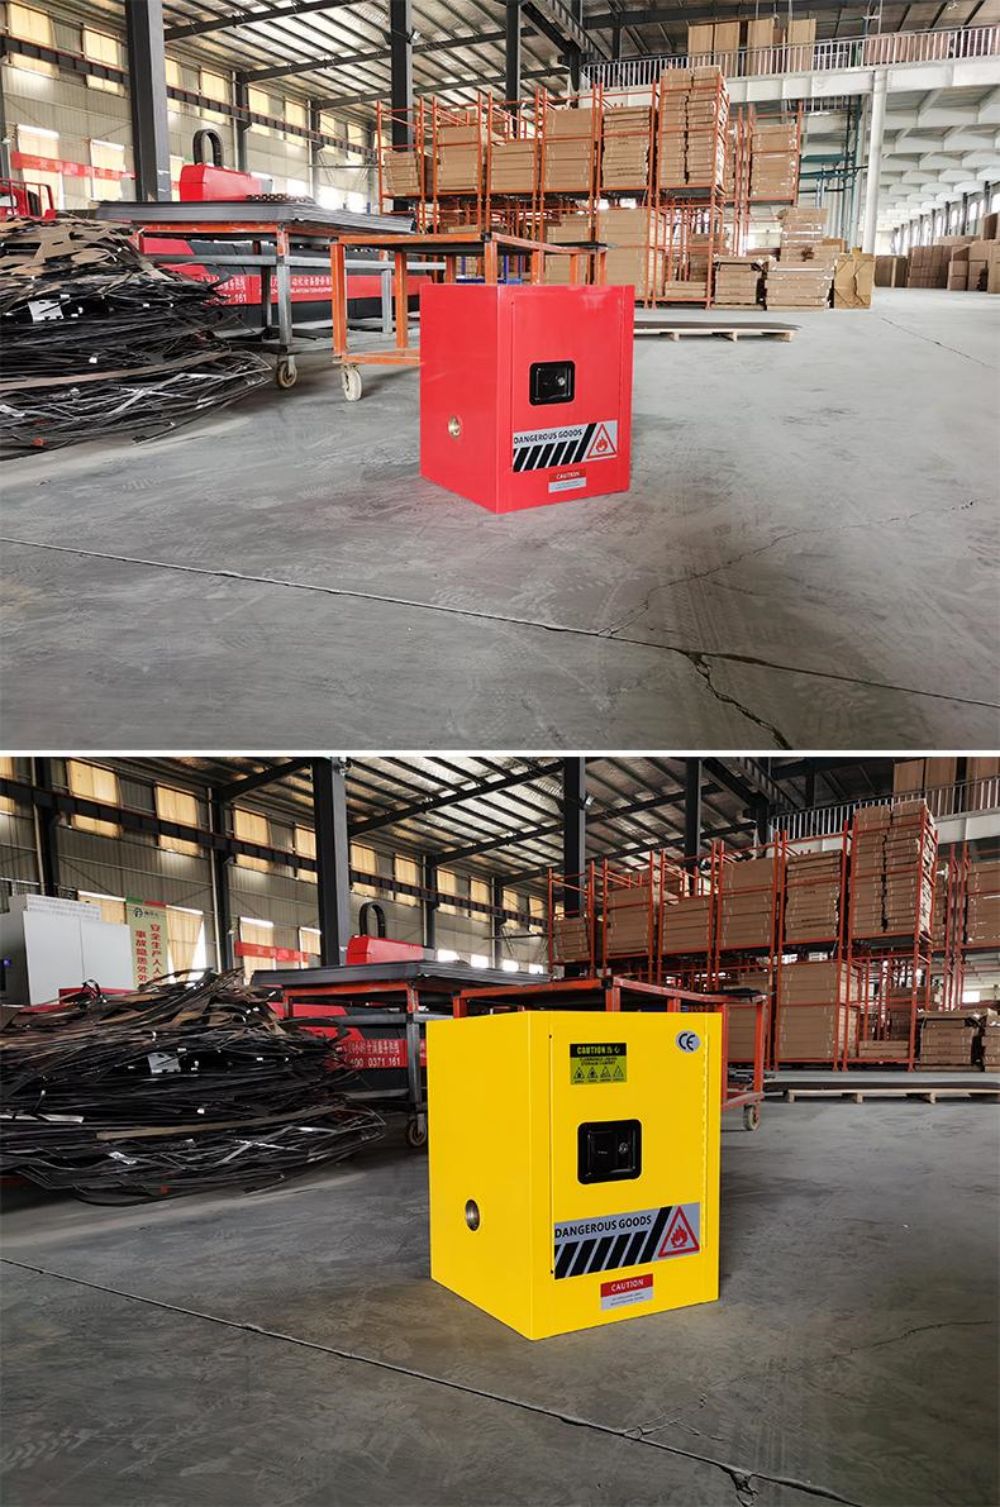 Explosion Proof Cabinet 